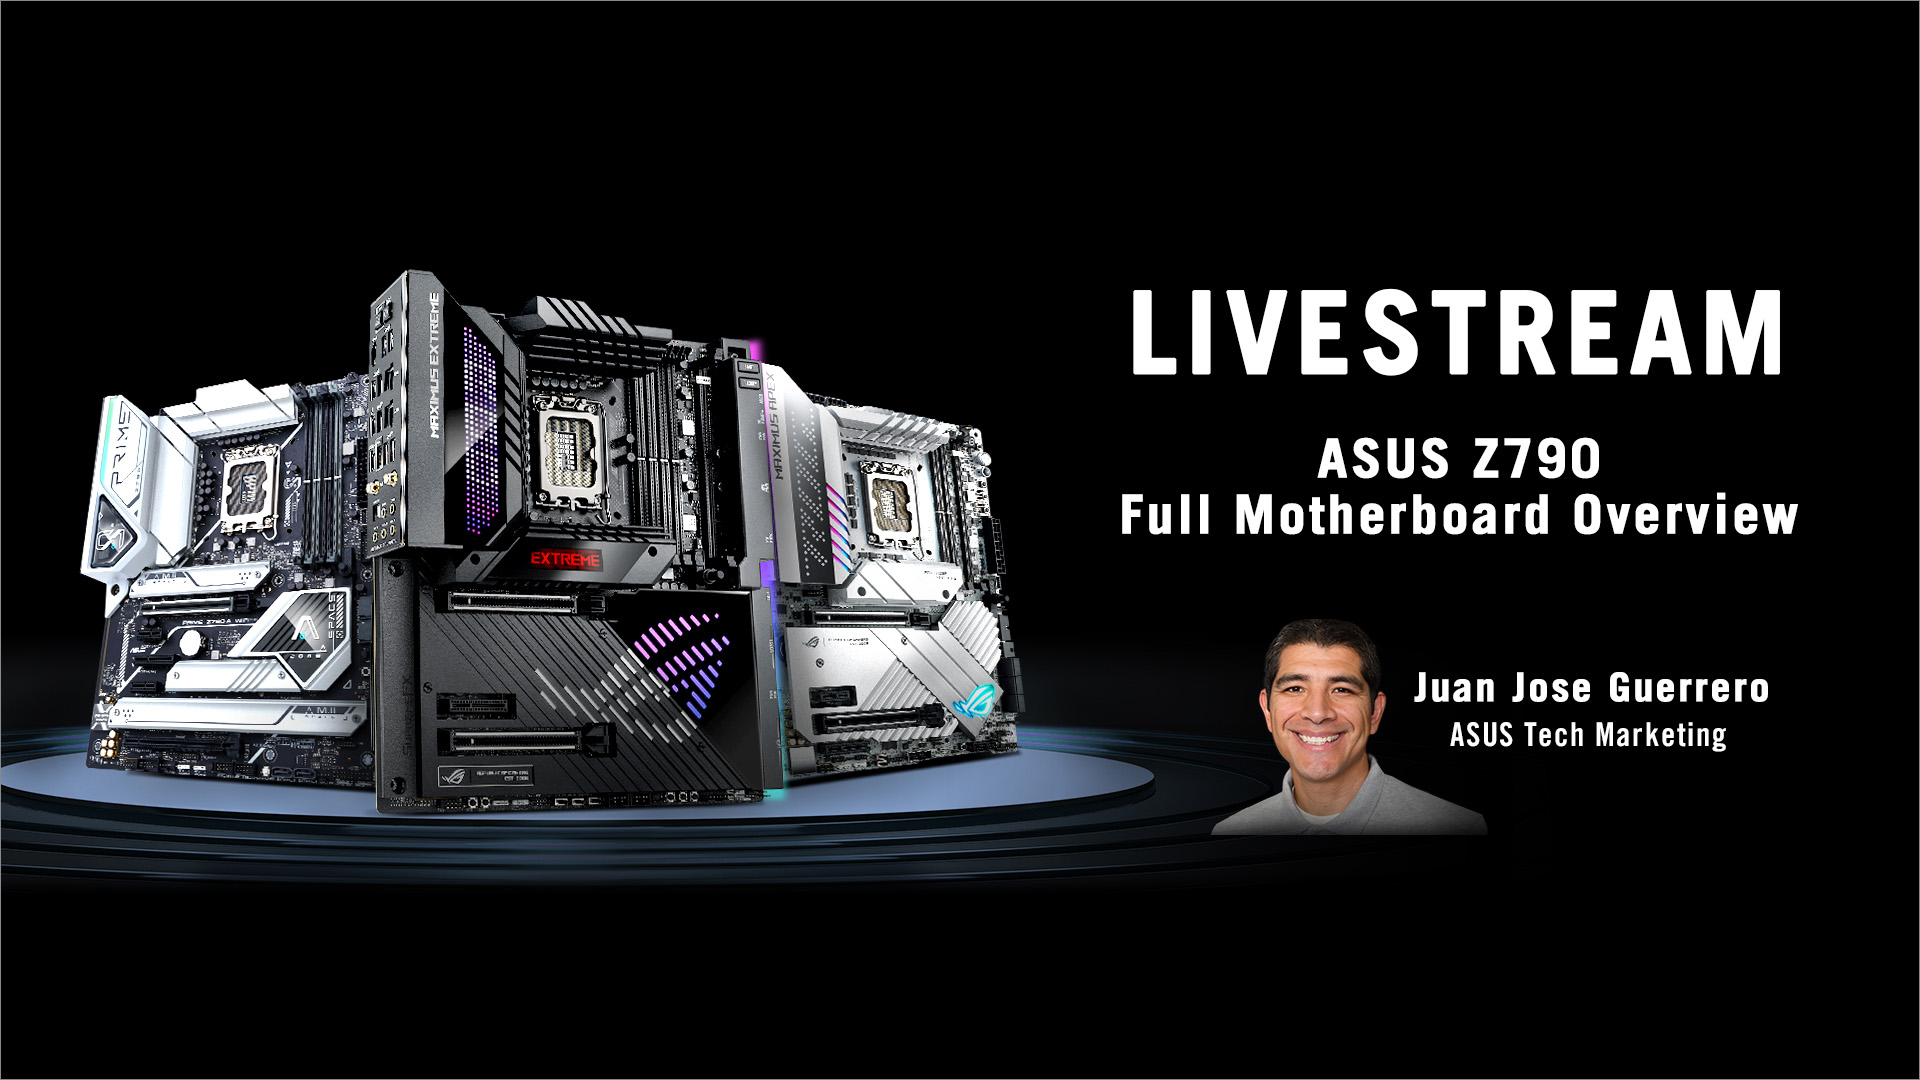 Image with livestream info and the portrait of ASUS Technical Marketing Juan Jose Guerrero